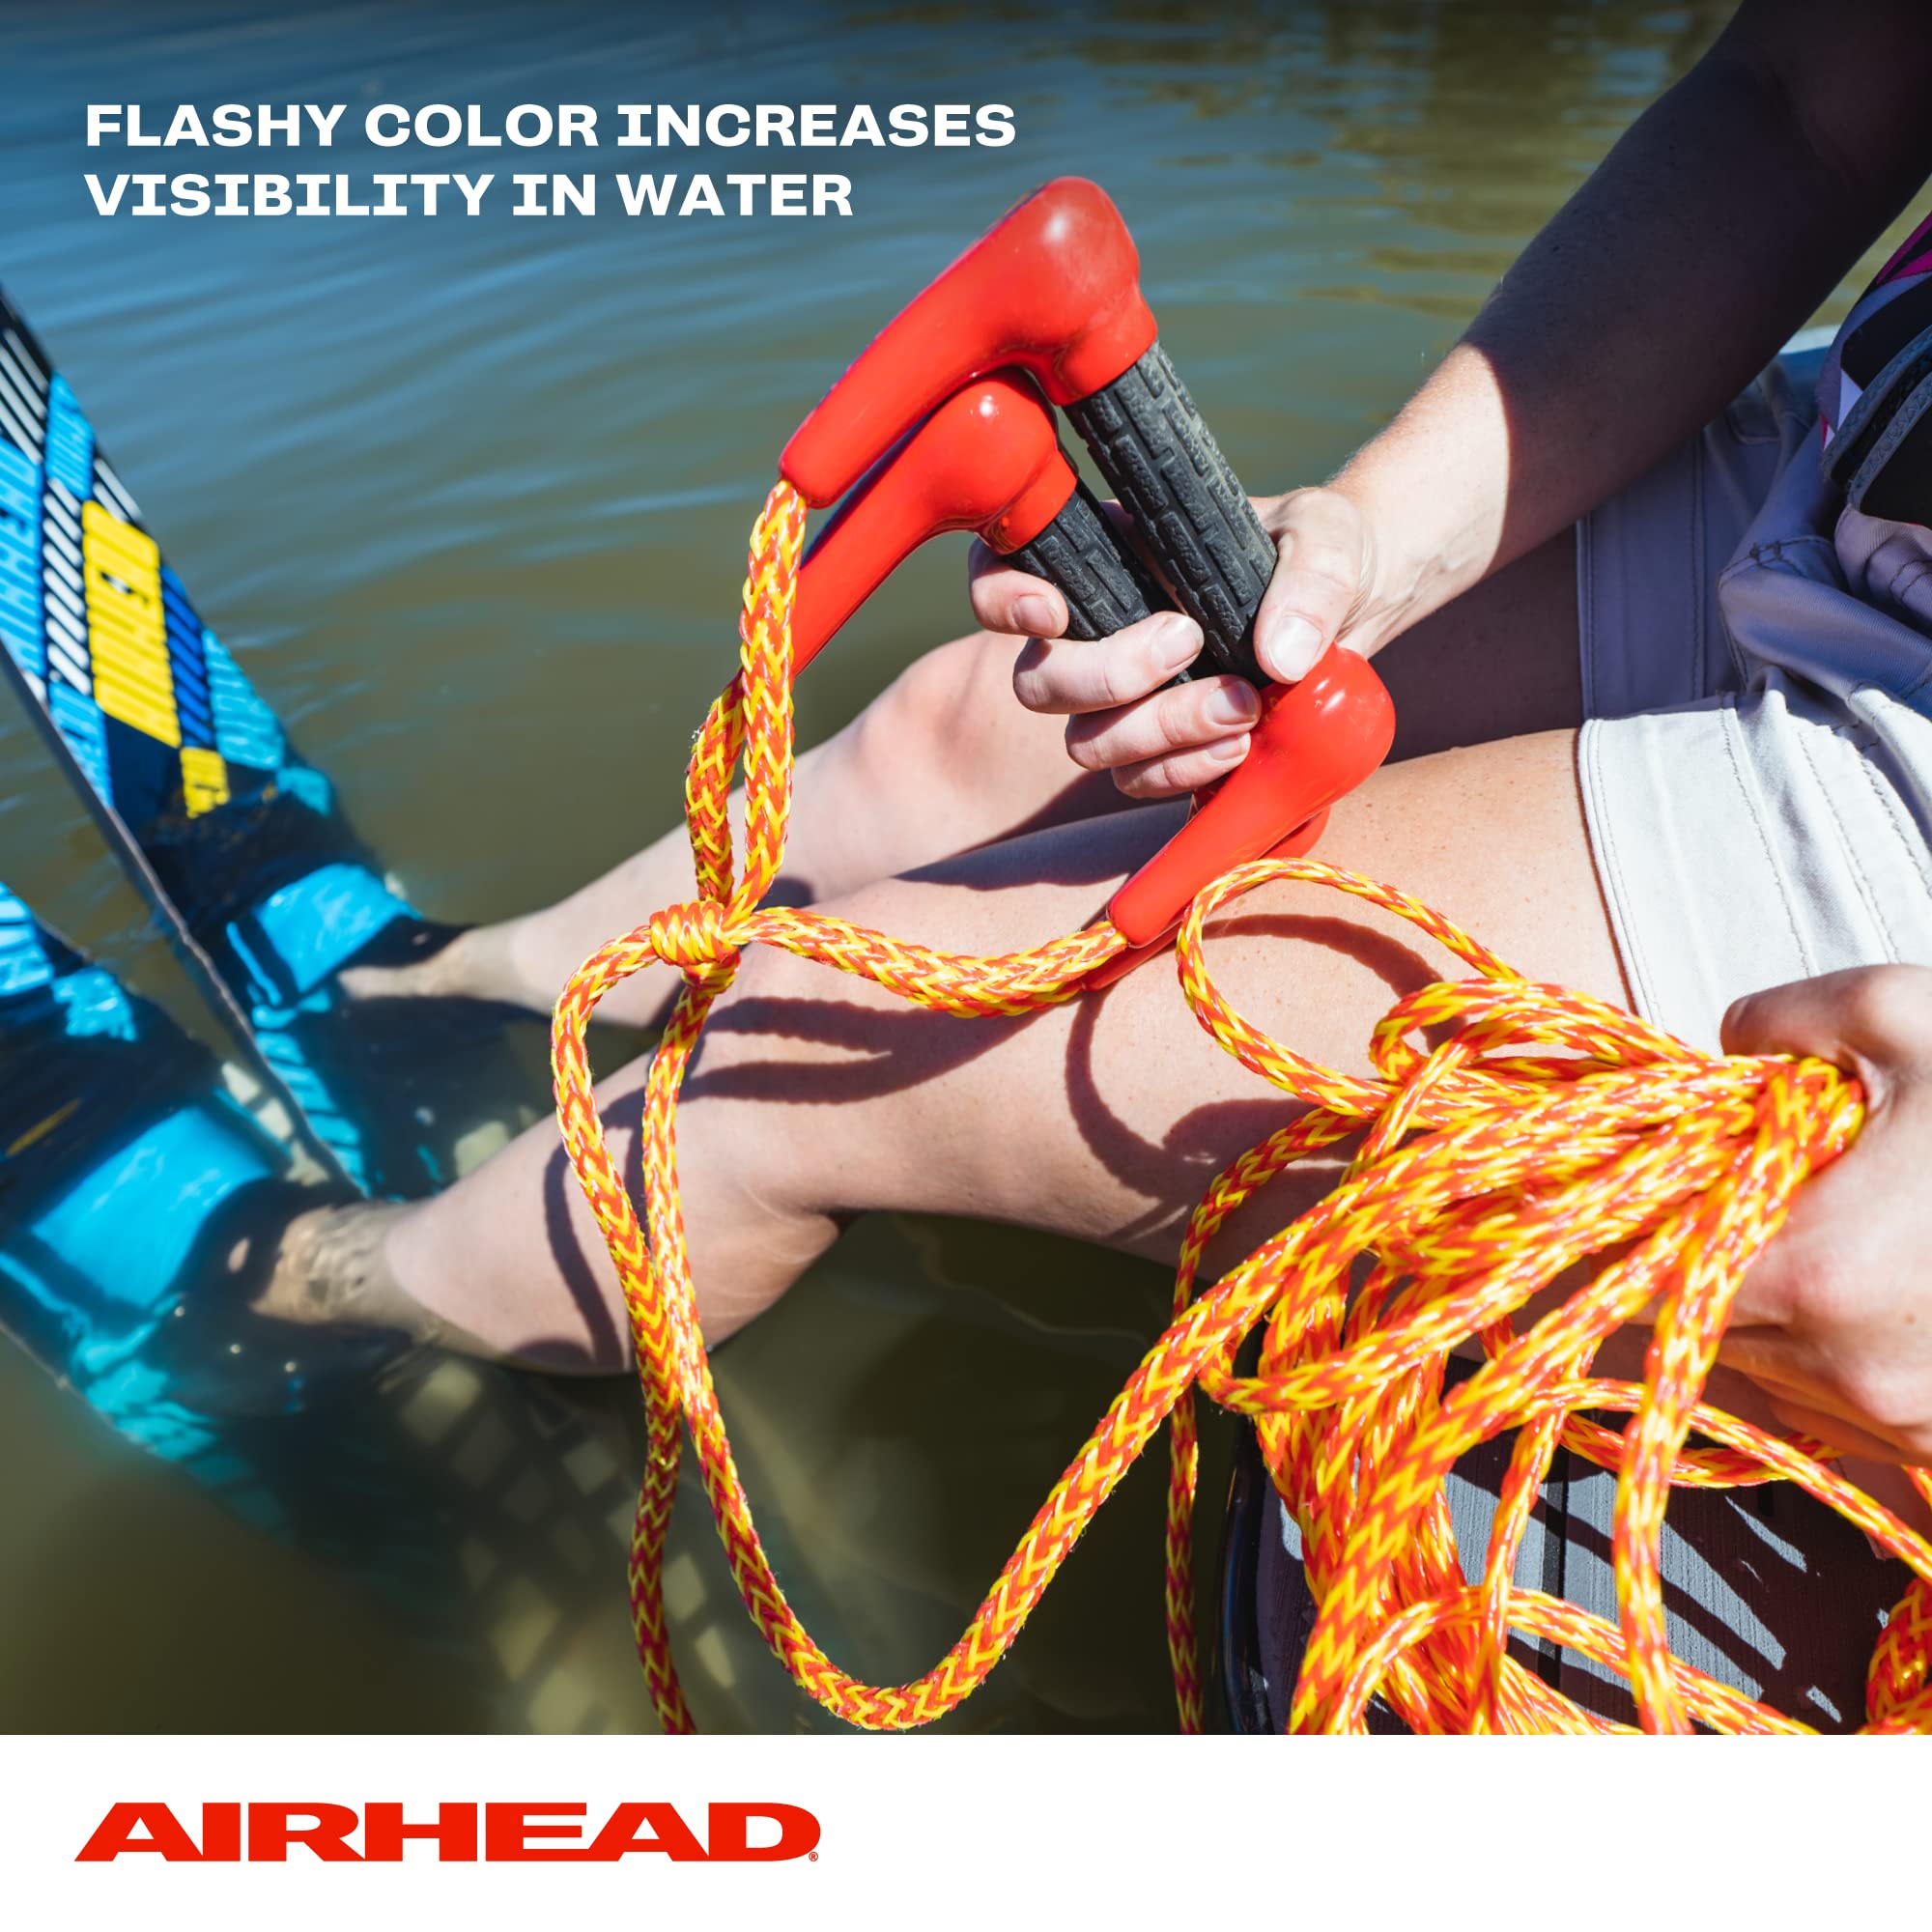 Airhead Double Handle Water Ski Rope, 1 Section, 75-Feet